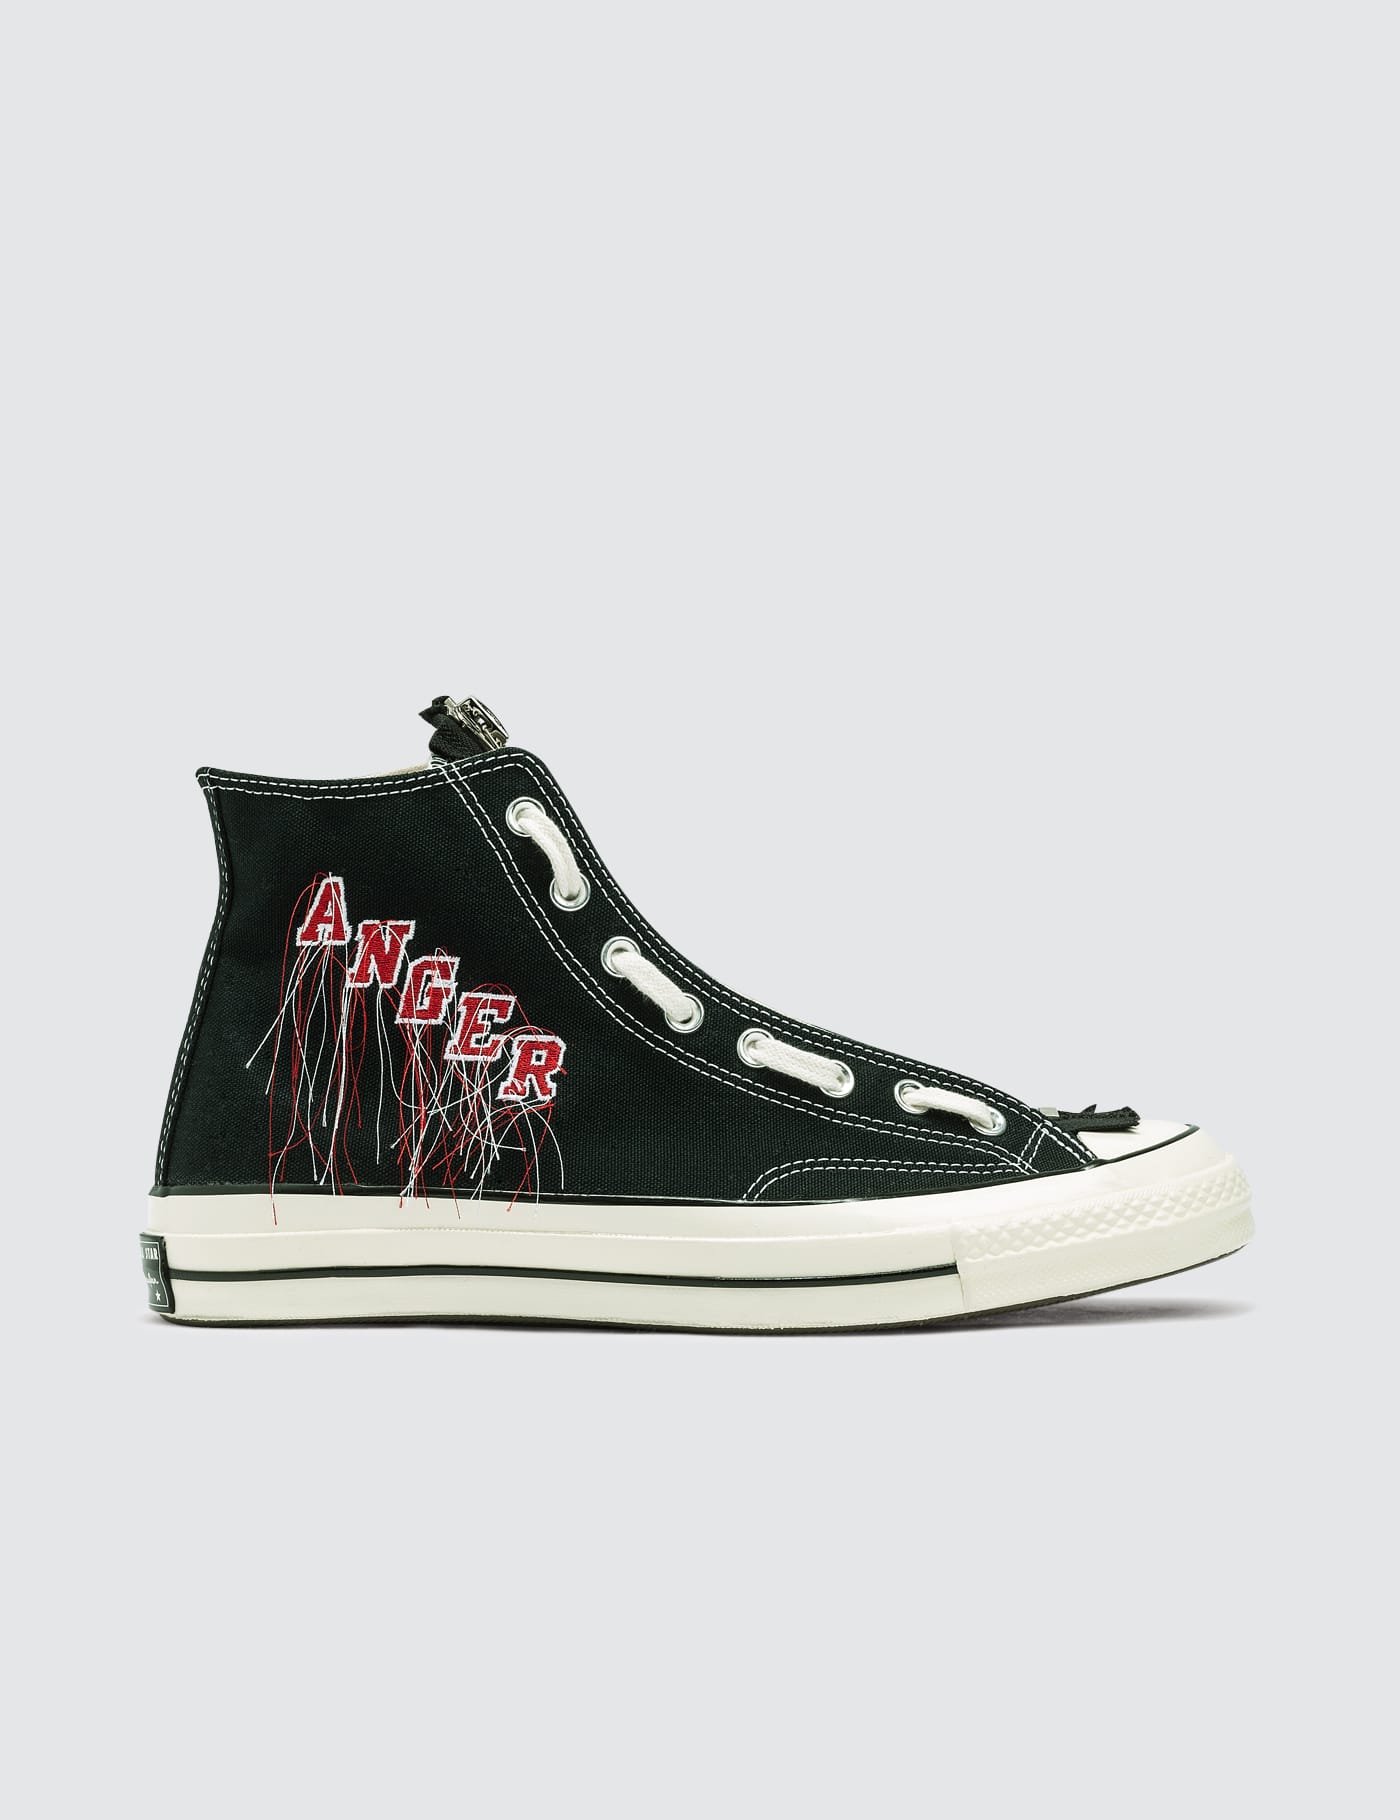 Mr. Completely - Mr Completely X Converse Anger Converse | HBX